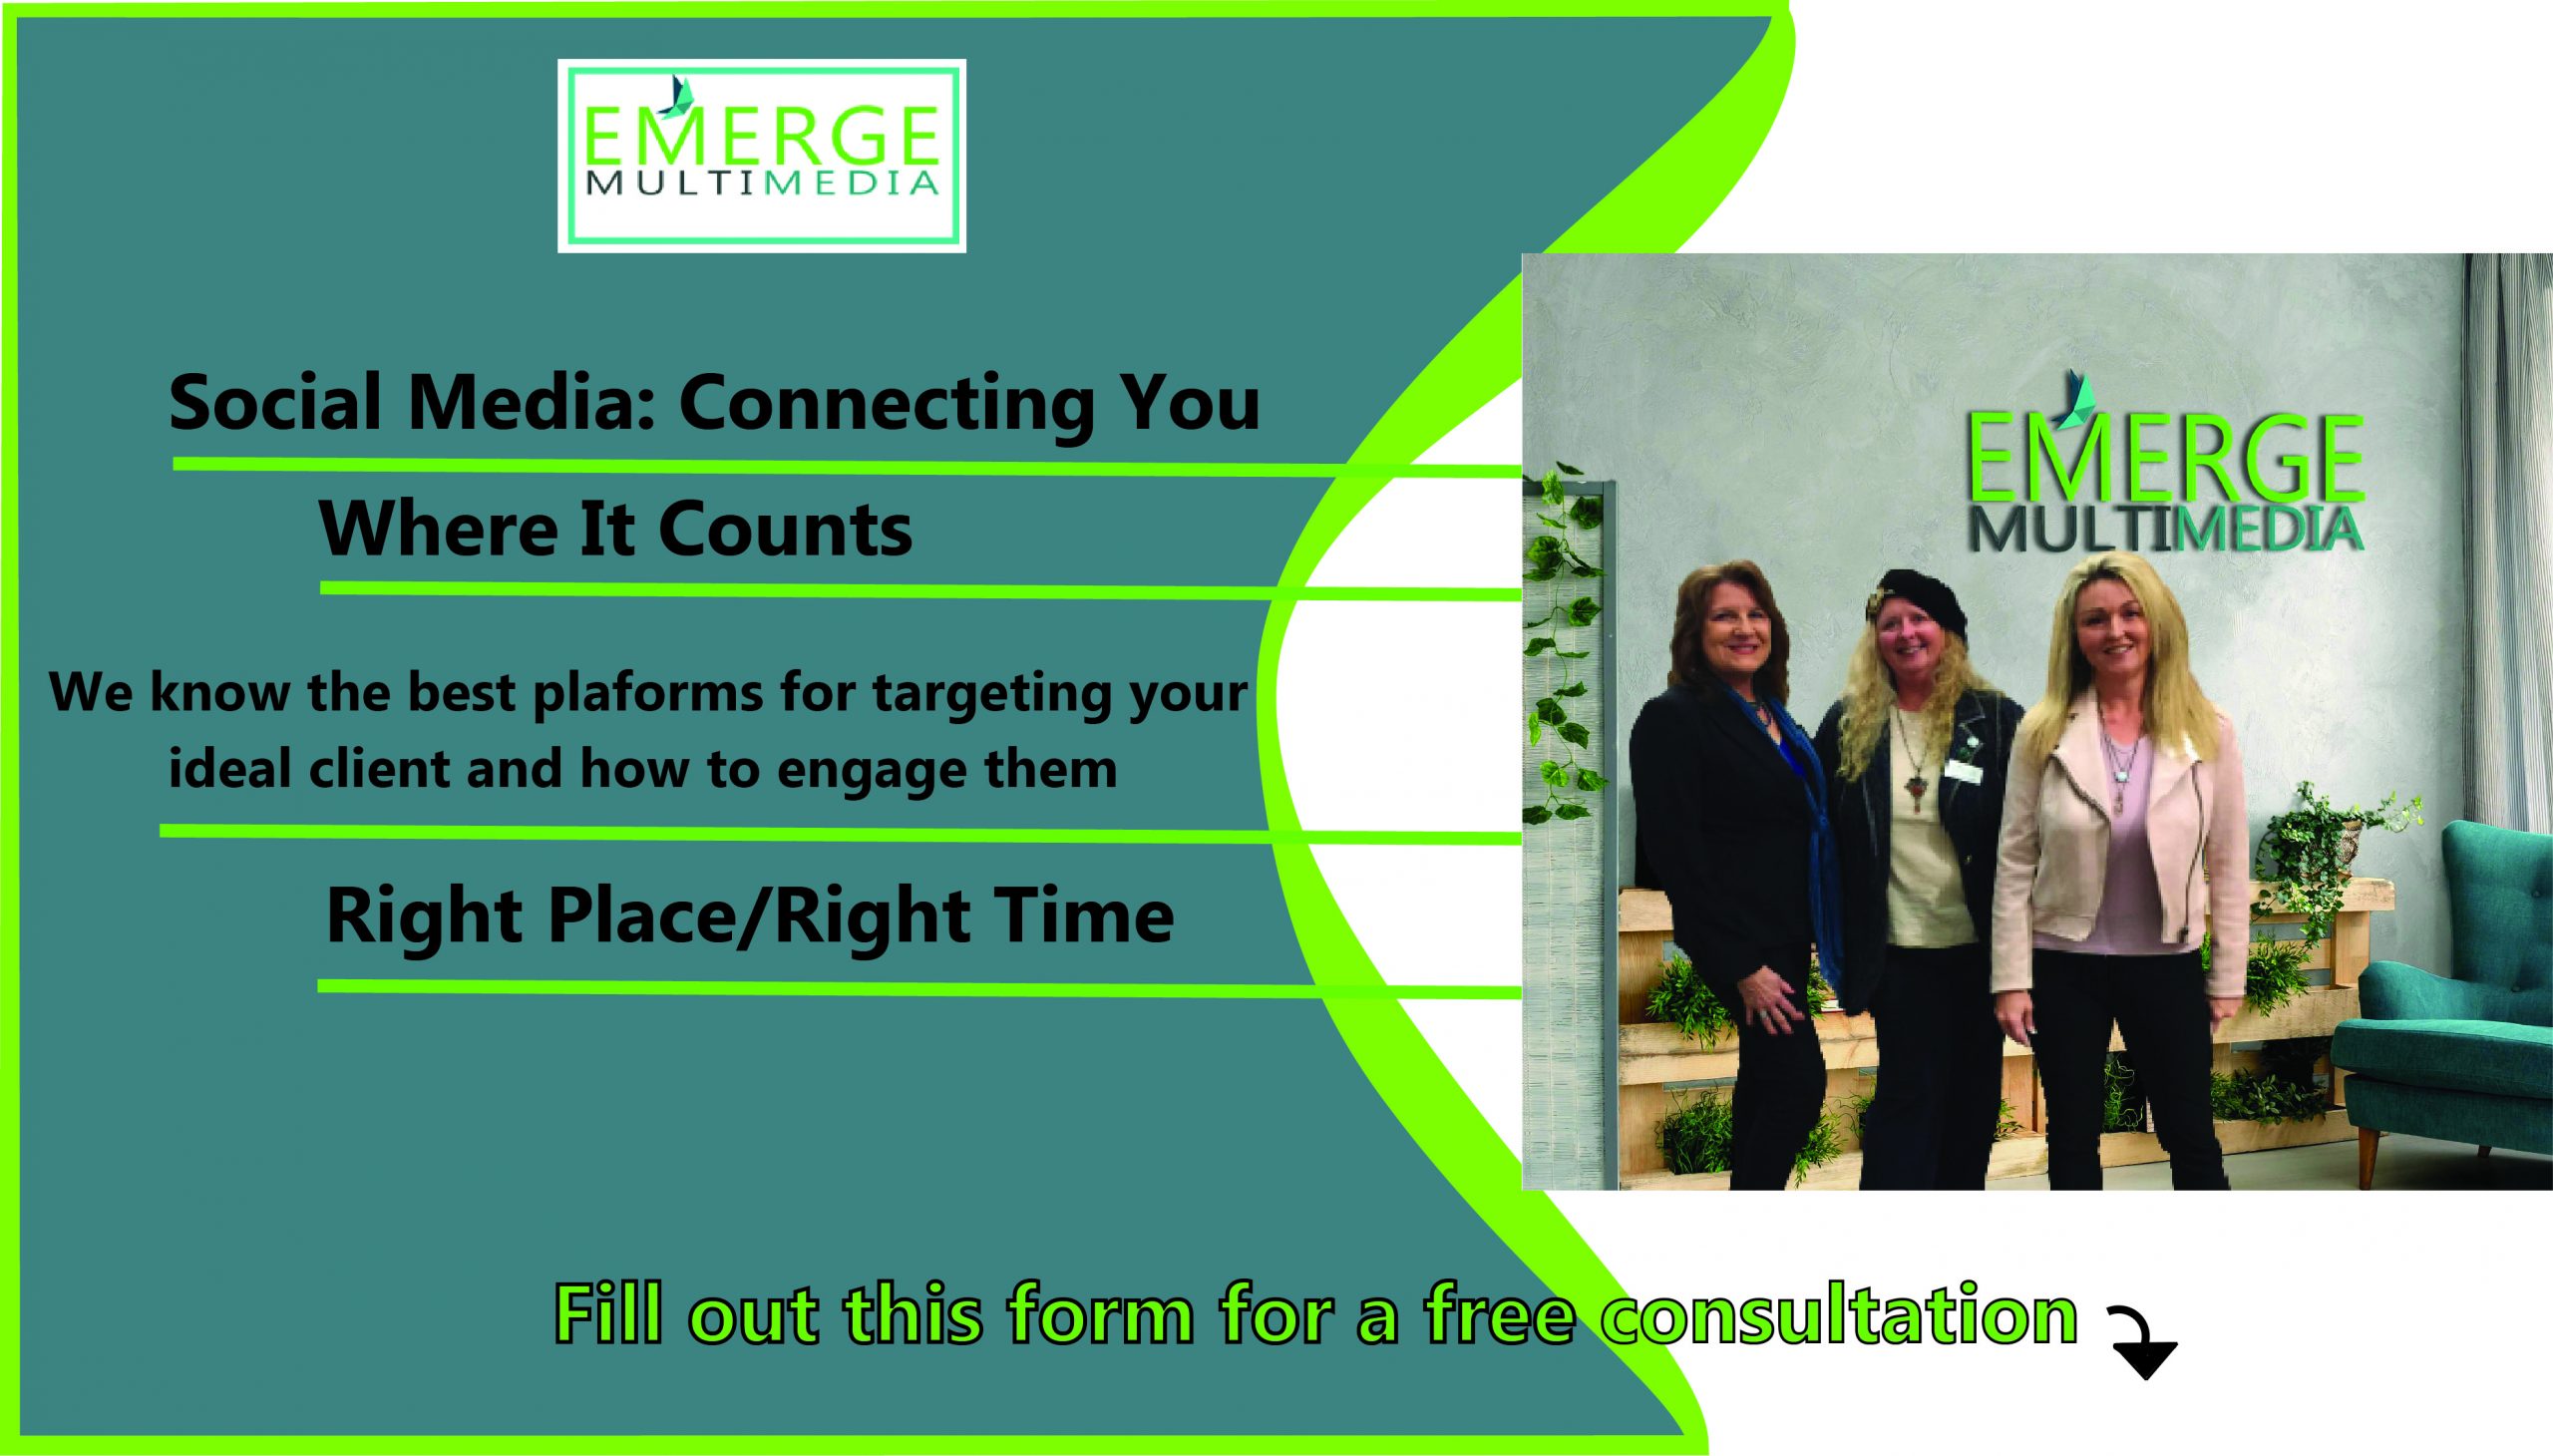 Emerge Multimedia Social Media landing page graphic with Janet, Nadine and Amy